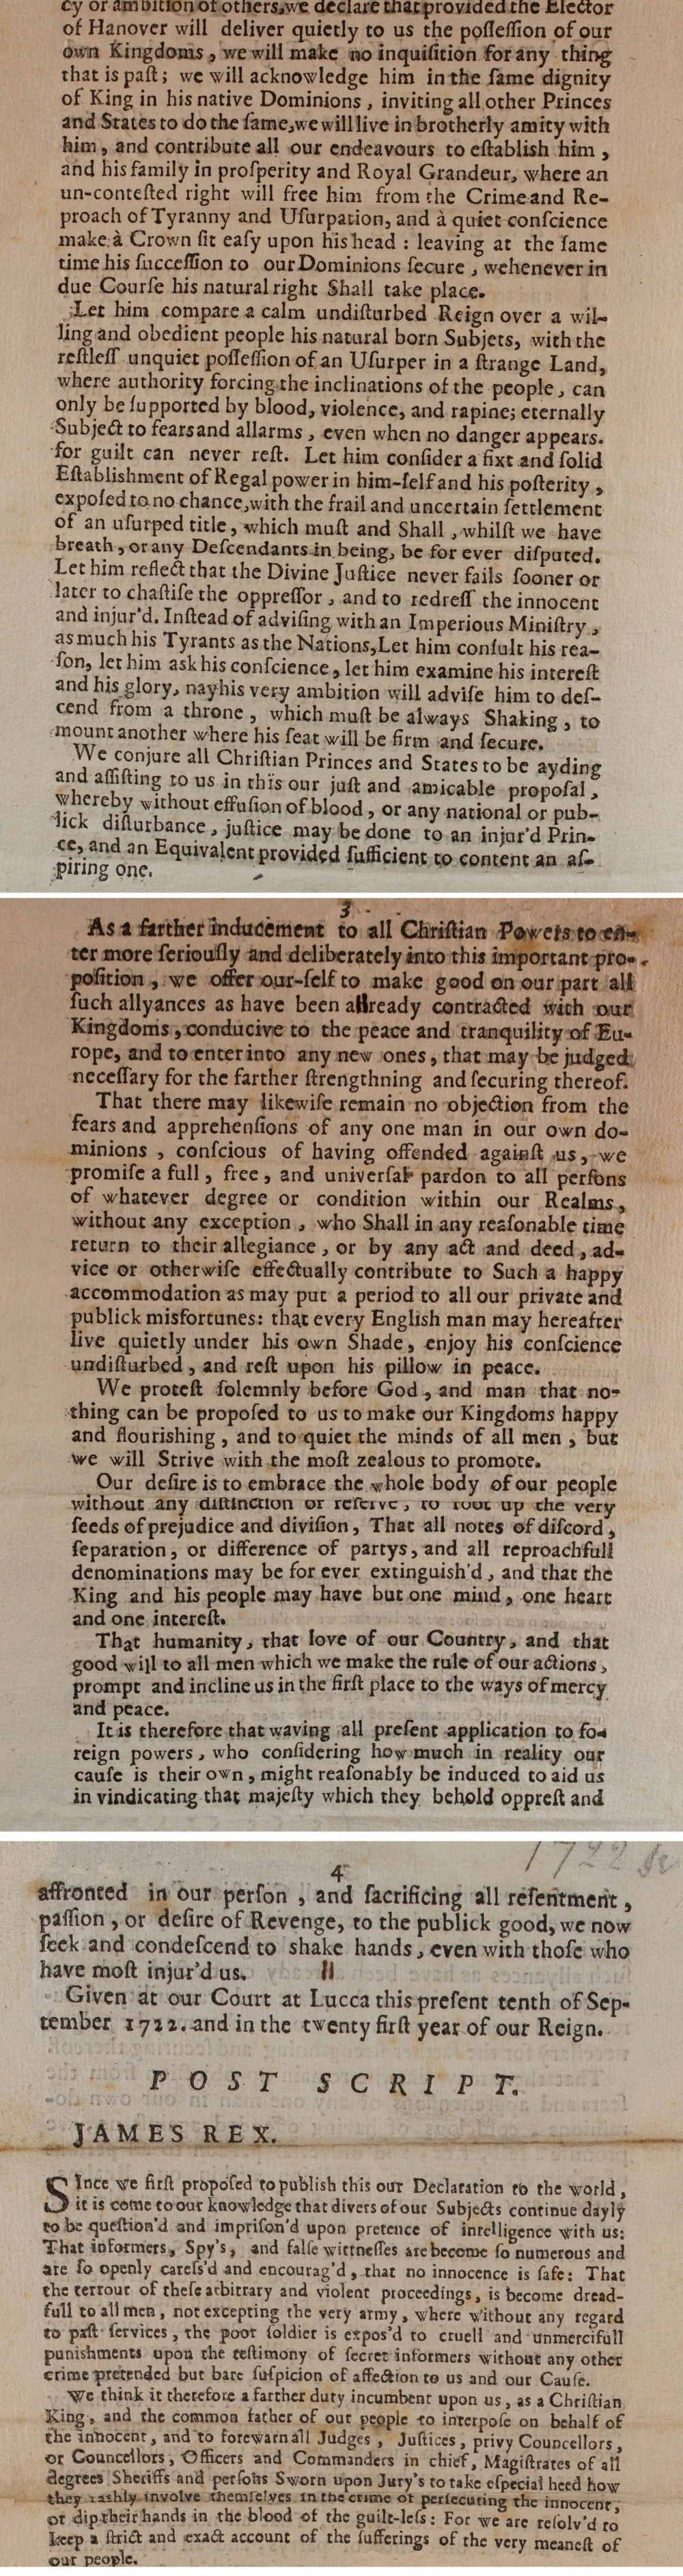 Extracts from a Jacobite Manifesto, dated at Lucca , Italy, 10th September 1722